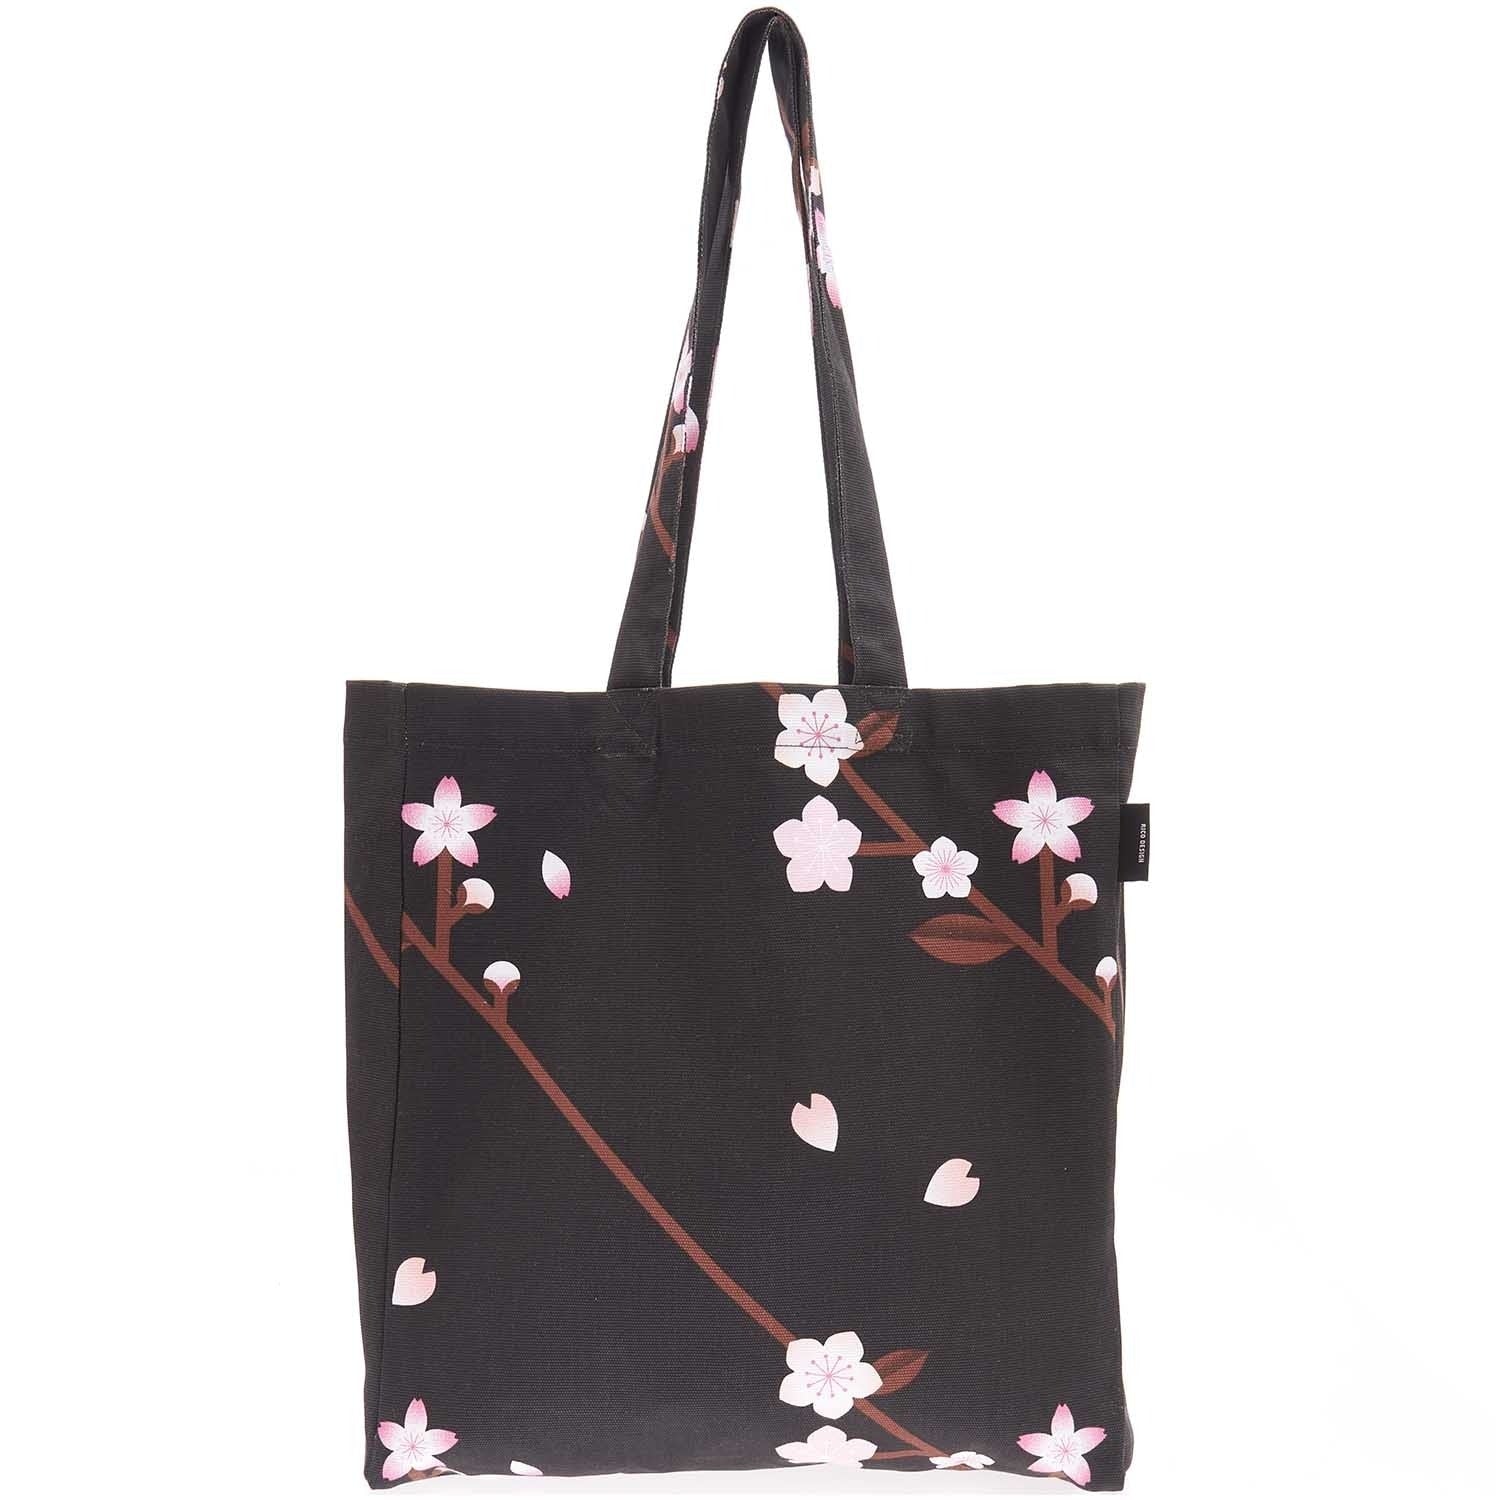 5 Styles of Japanese Bags for Women (Unleash Your Style)